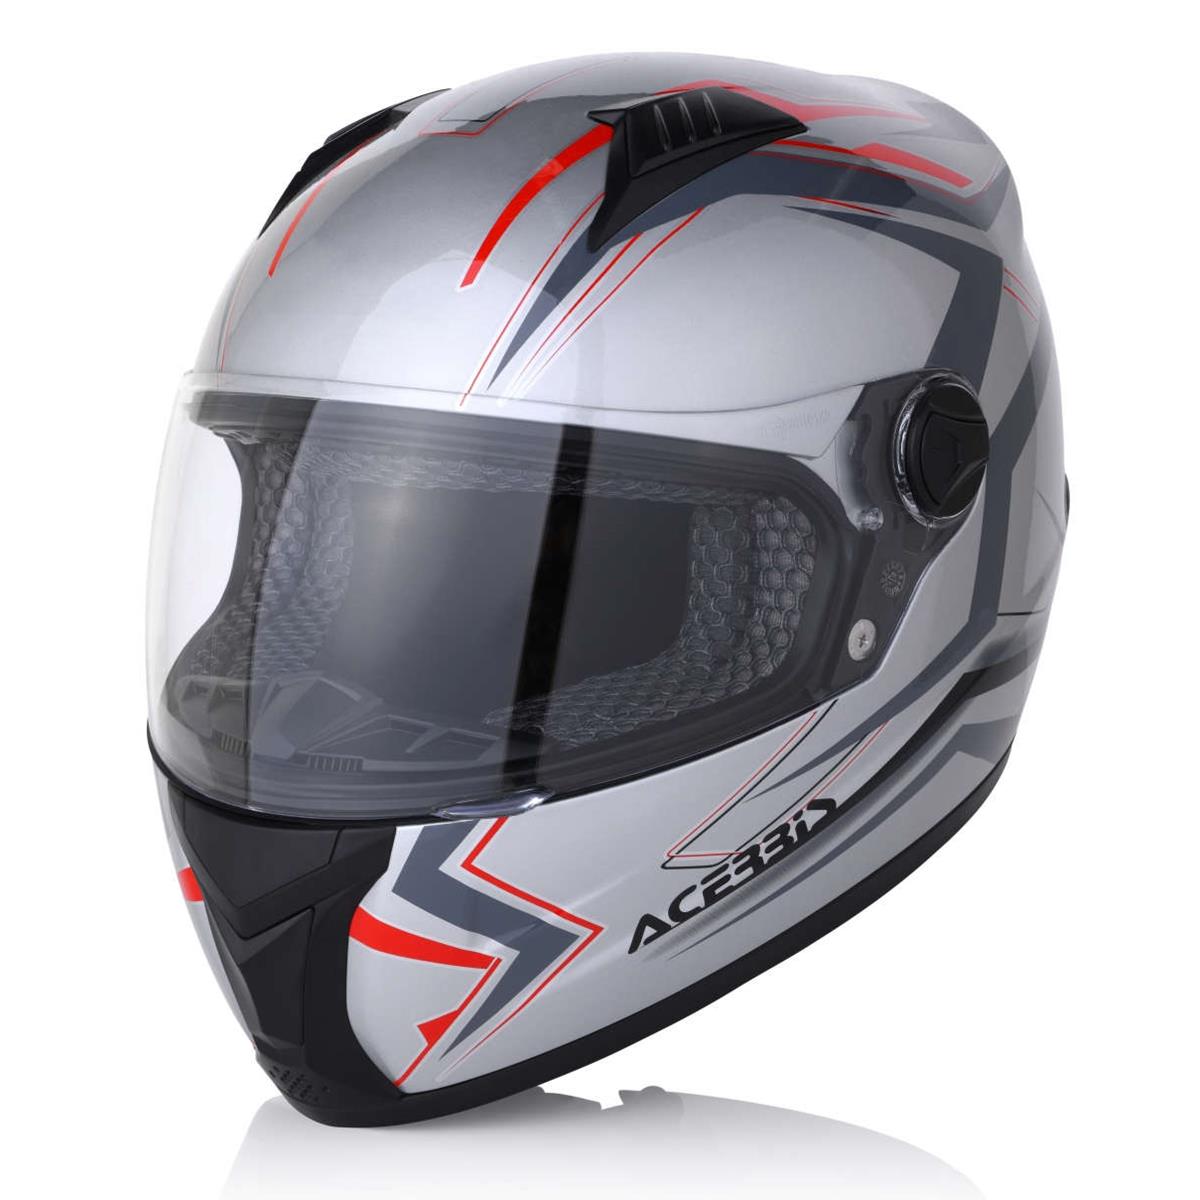 Acerbis Casque MX Full Face FS-807 Silver/Red